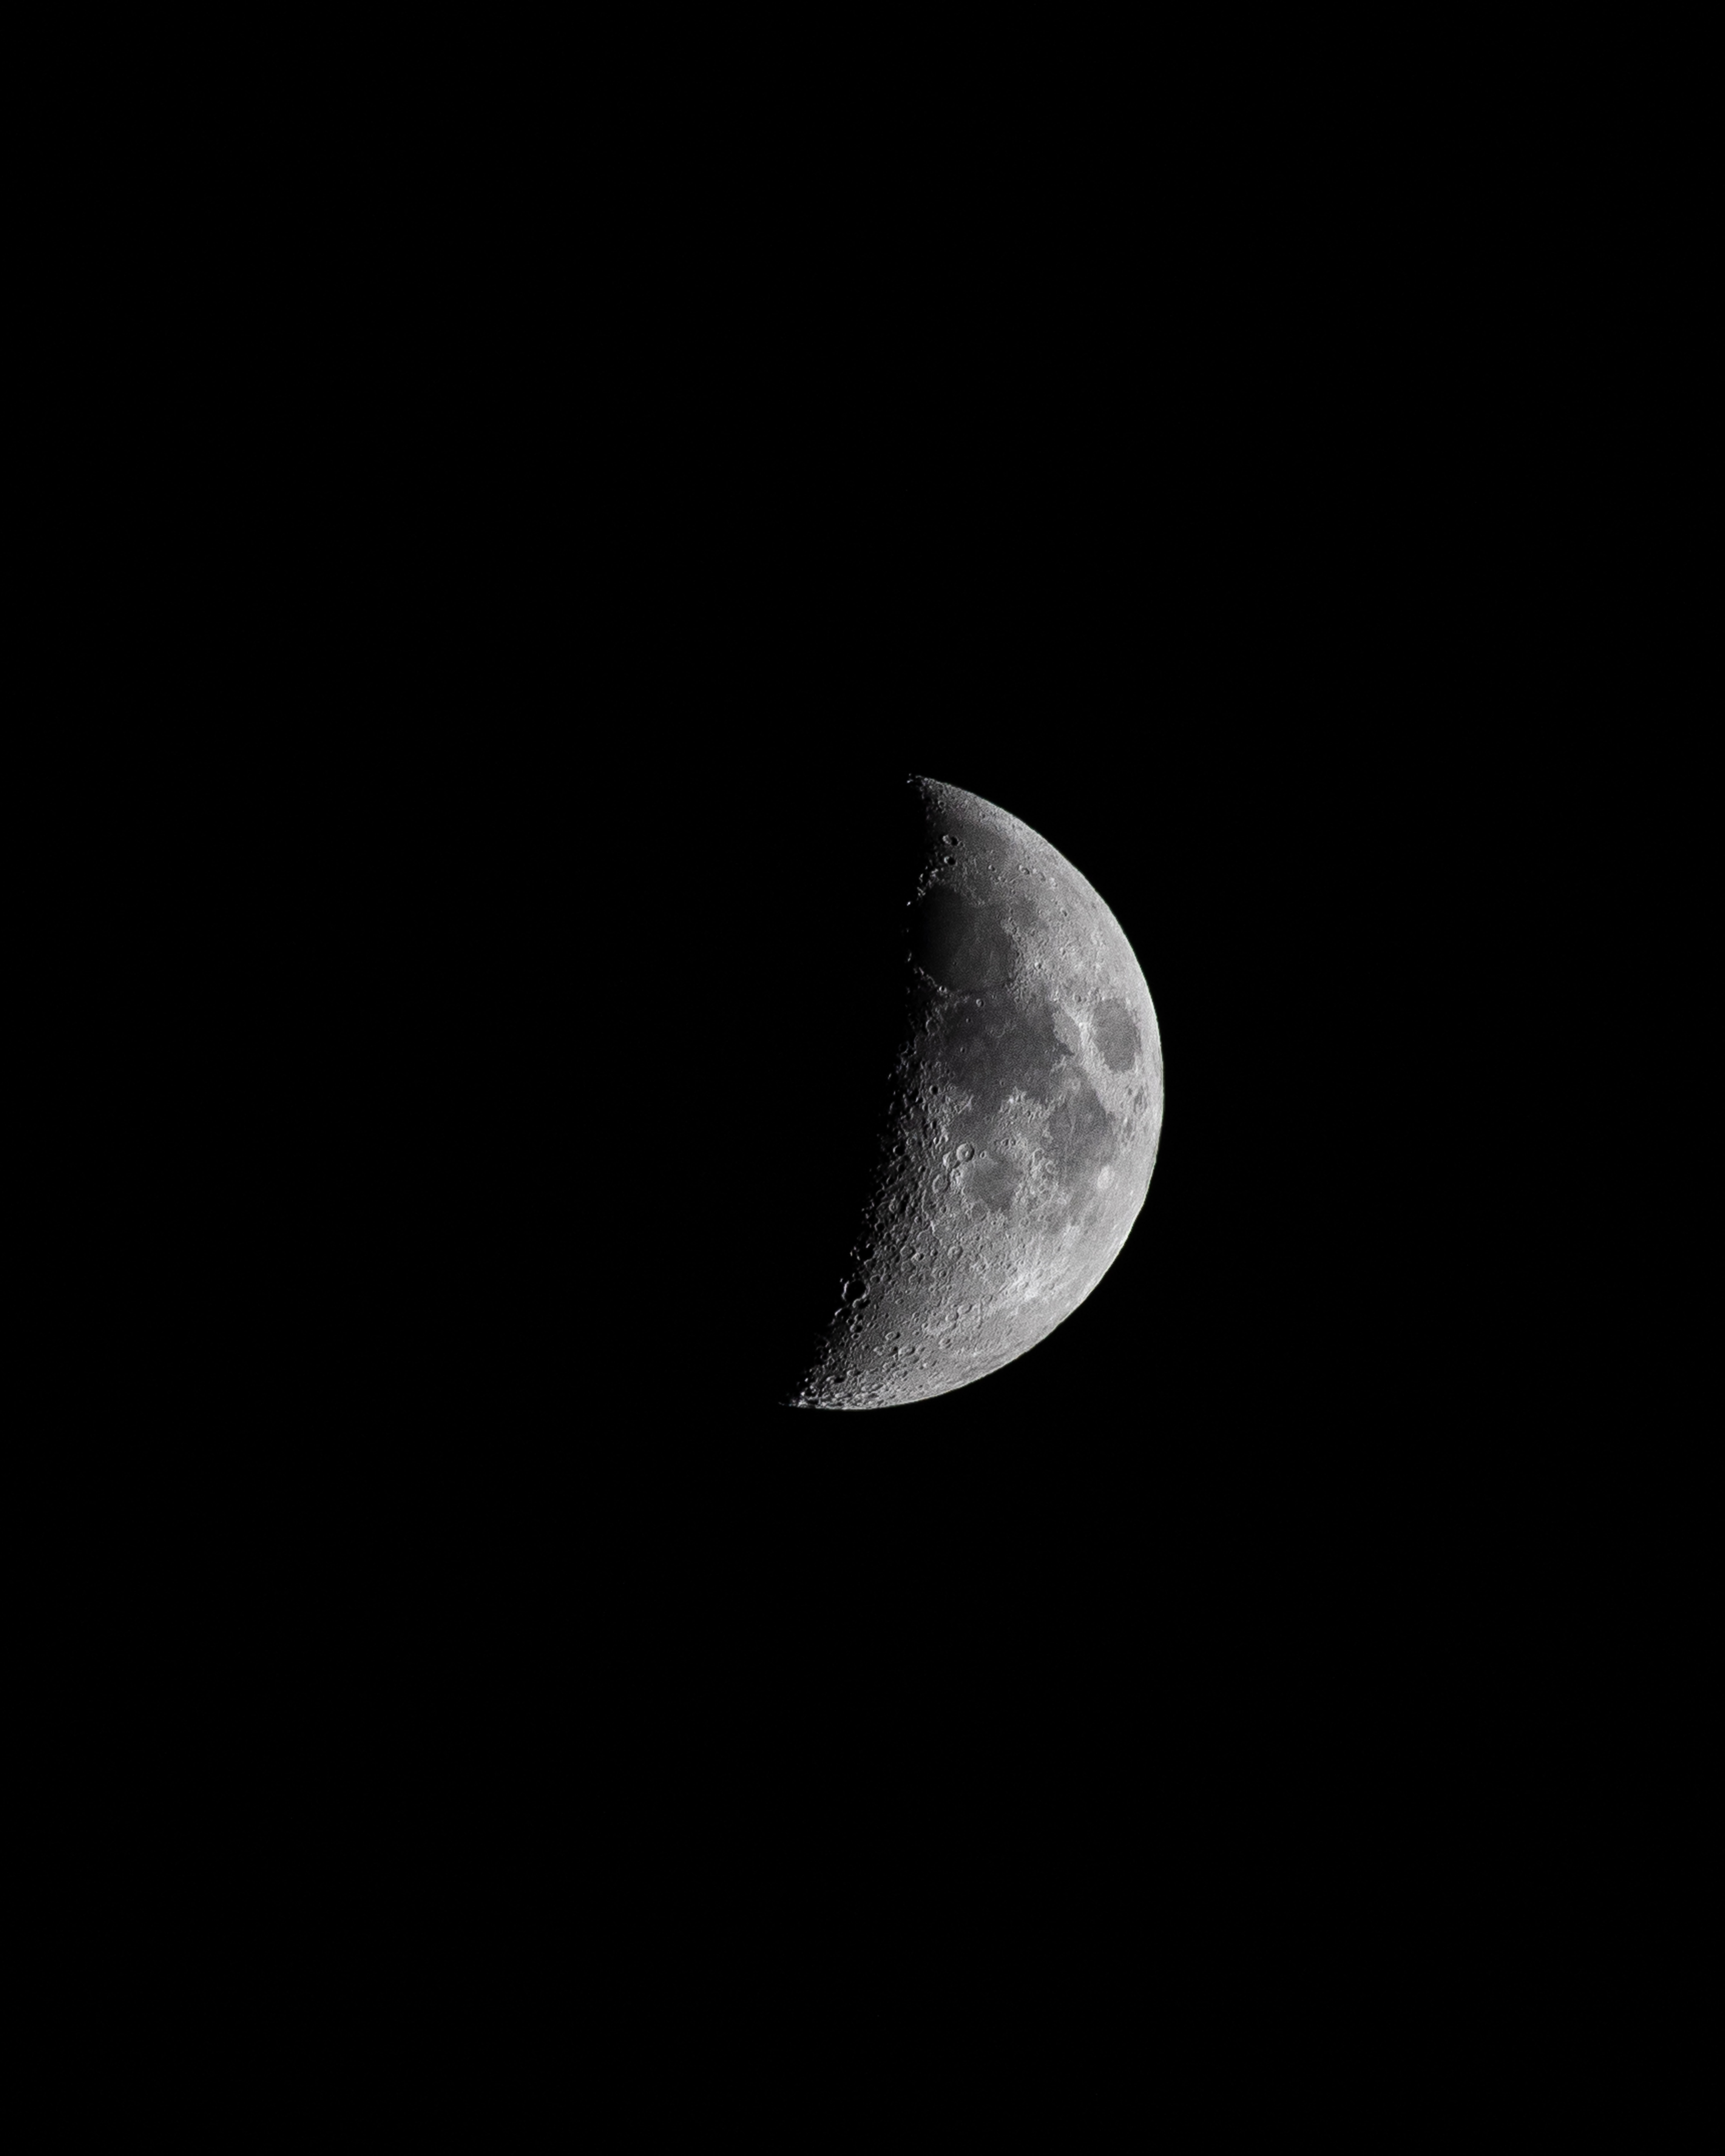 moon, night, black, shadow, craters images